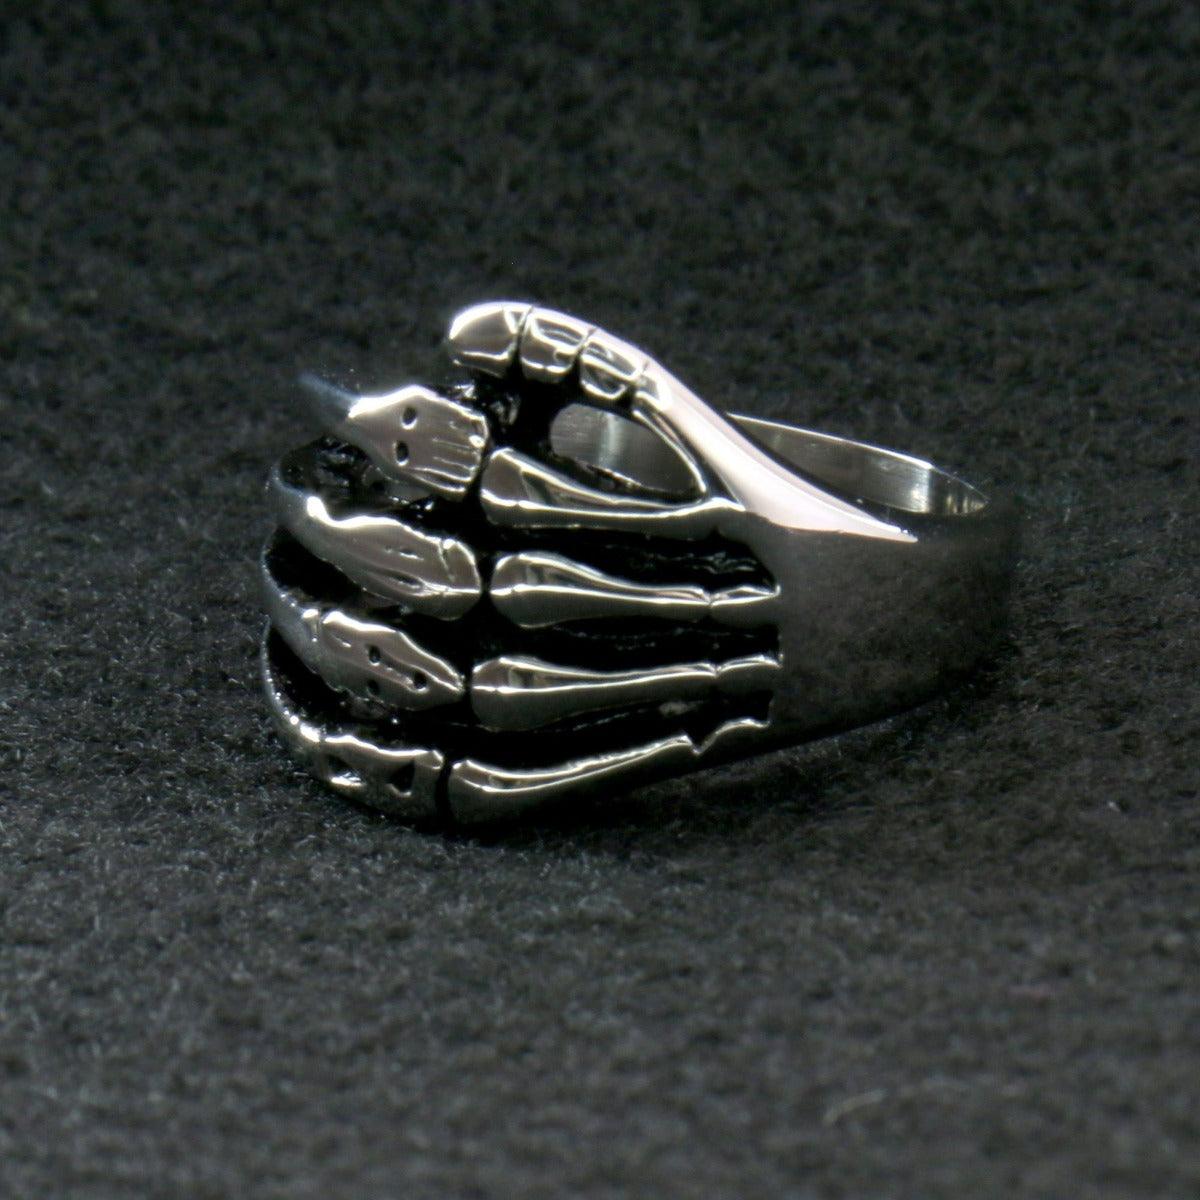 Hot Leathers Skeleton Hand Ring - American Legend Rider